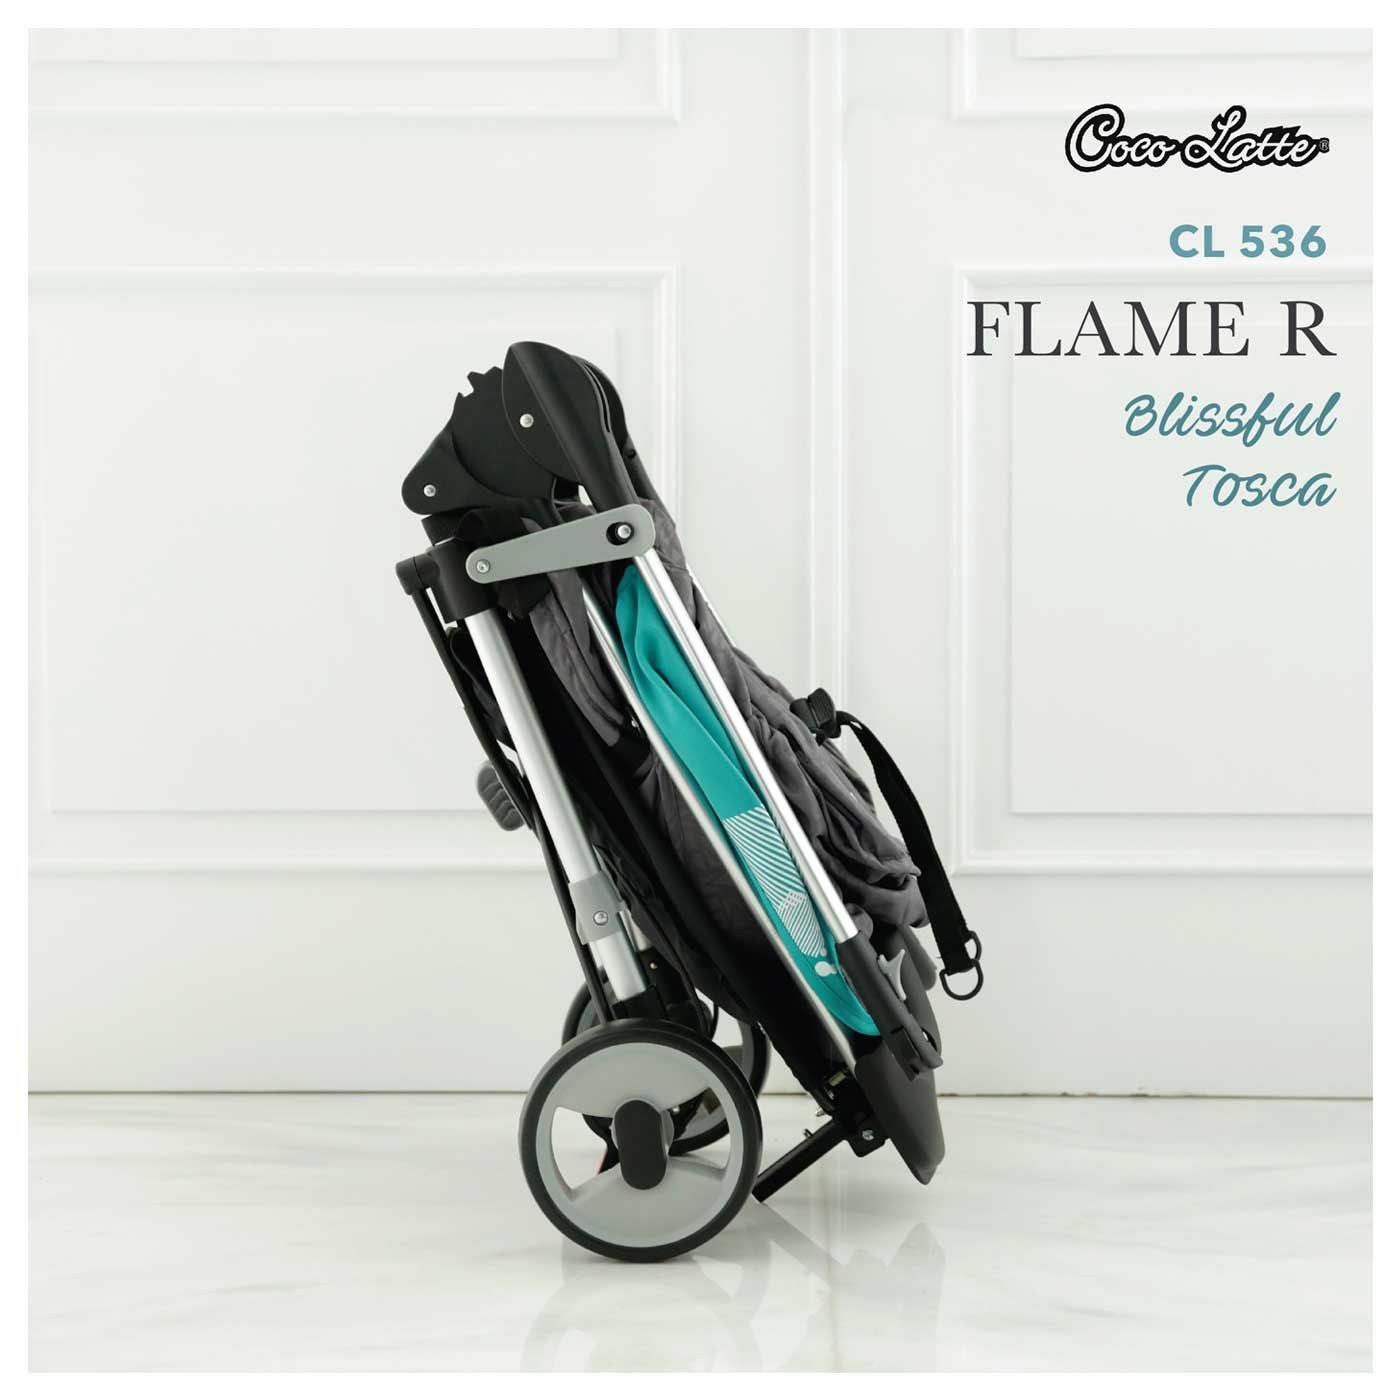 Promo Cocolatte Stroller CL 536 Flame R- Blissful Tosca - 3